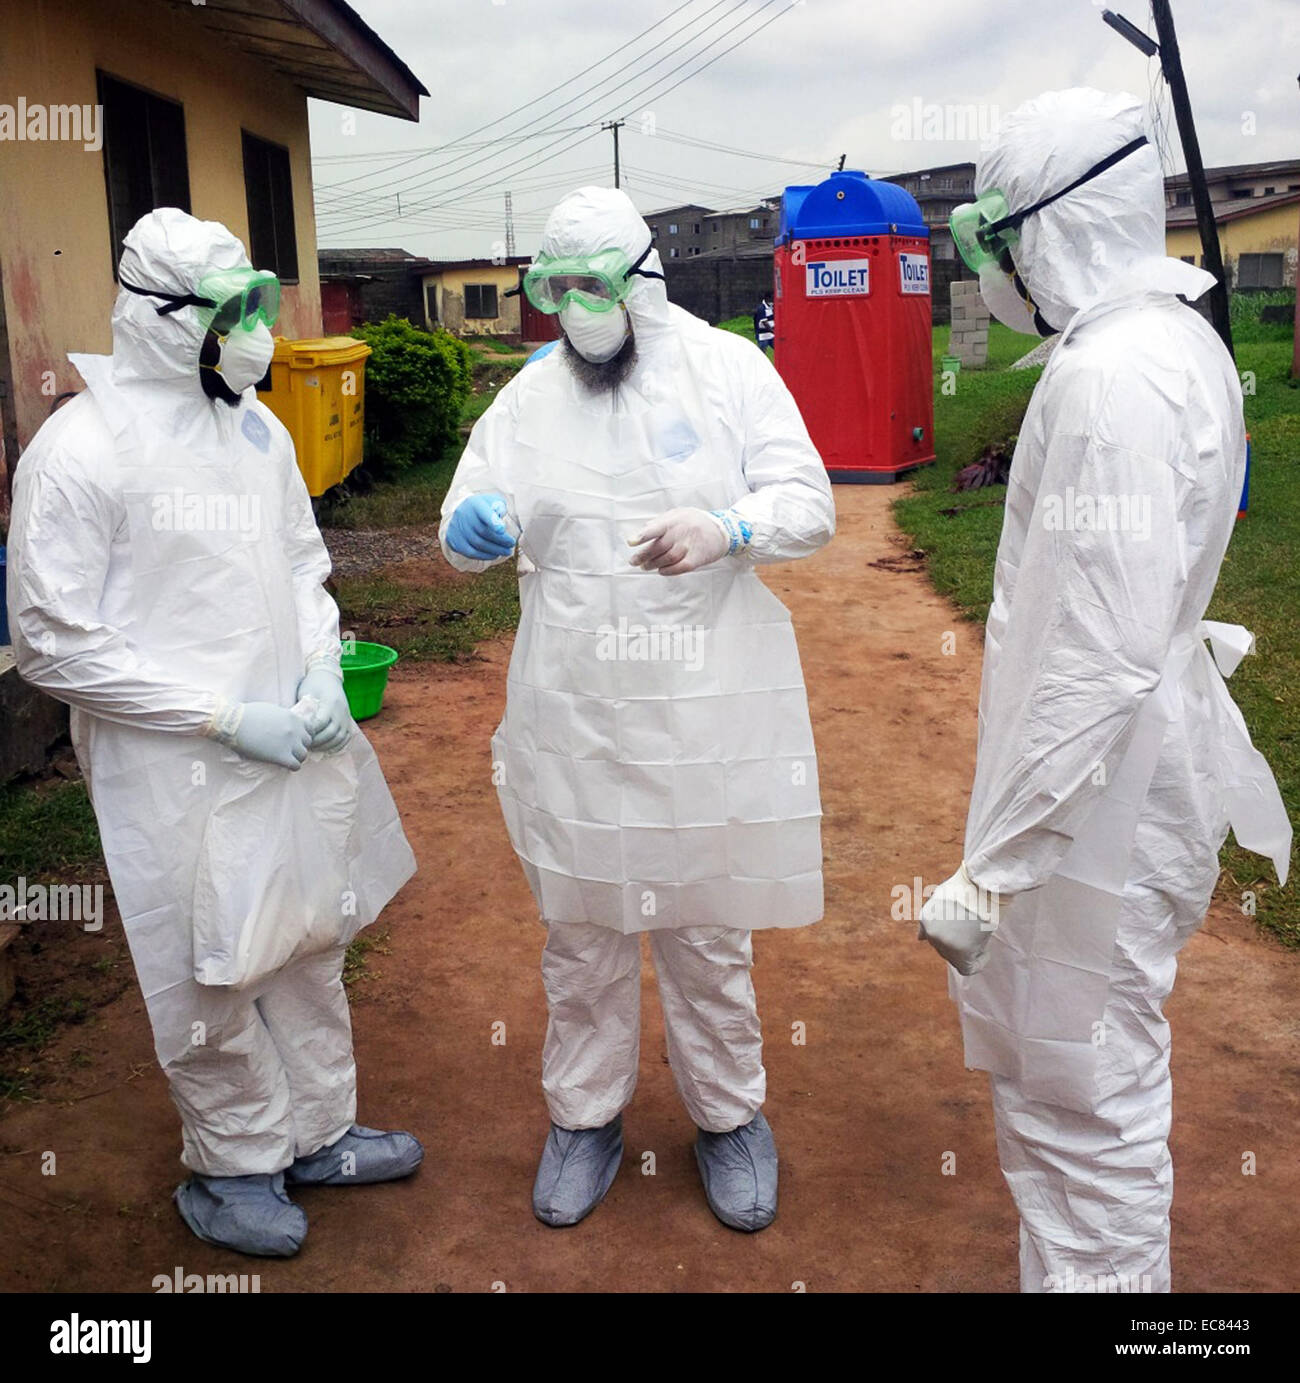 Preparation of medical staff to deal with the 2014 Ebola outbreak in Nigeria. Training session; for Nigerian physicians by a member of the World Health Organization (WHO) for proper protocols to be followed when donning and removing personal protective equipment. Stock Photo